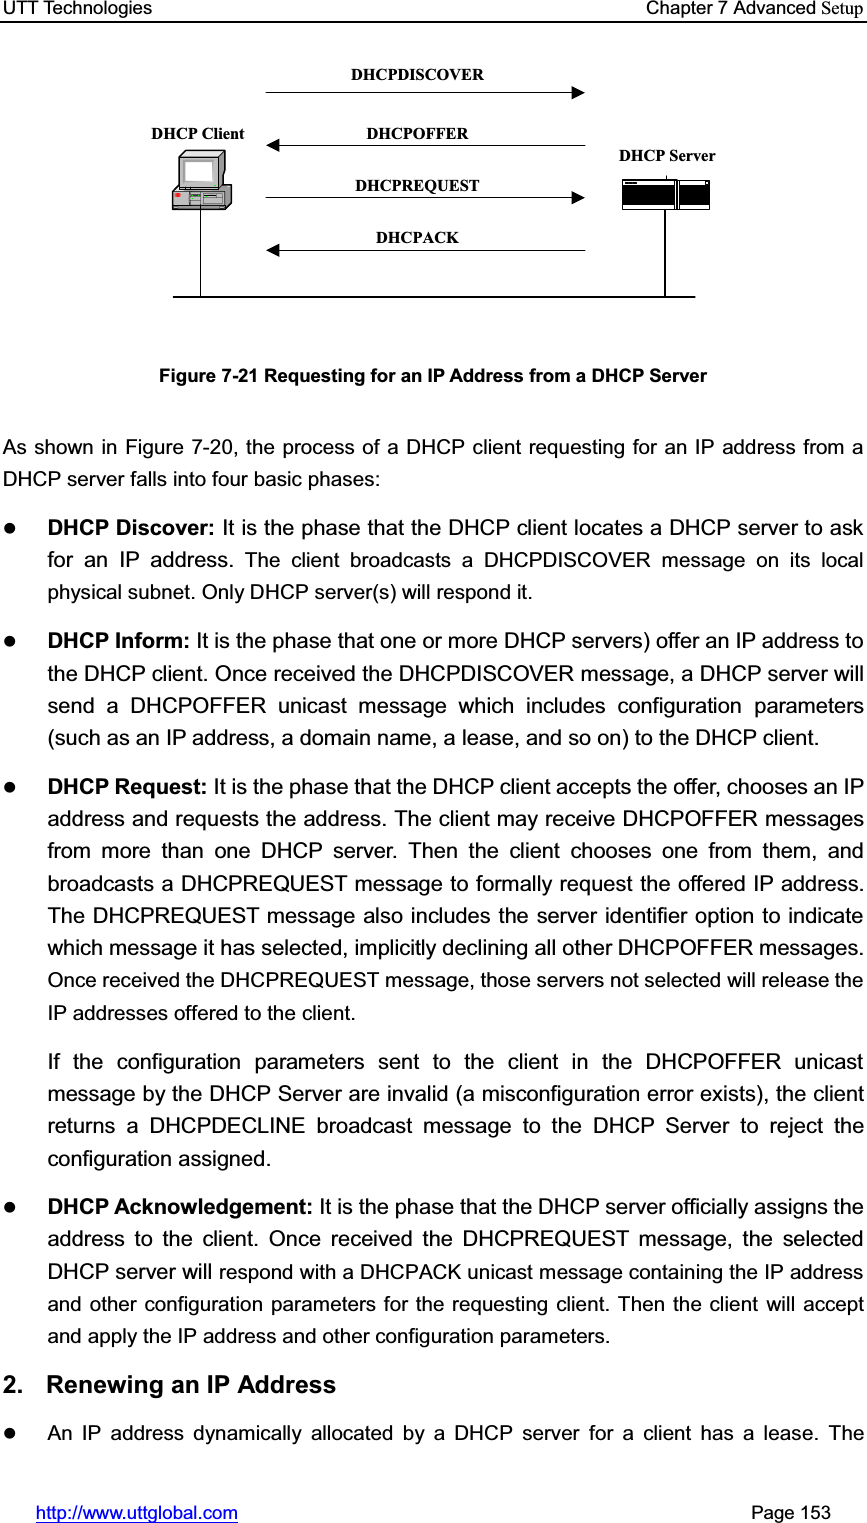 UTT Technologies    Chapter 7 Advanced Setuphttp://www.uttglobal.com                                                       Page 153 DHCP ClientDHCP ServerDHCPDISCOVERDHCPOFFERDHCPREQUESTDHCPACKFigure 7-21 Requesting for an IP Address from a DHCP Server As shown in Figure 7-20, the process of a DHCP client requesting for an IP address from a DHCP server falls into four basic phases: zDHCP Discover: It is the phase that the DHCP client locates a DHCP server to ask for an IP address. The client broadcasts a DHCPDISCOVER message on its local physical subnet. Only DHCP server(s) will respond it. zDHCP Inform: It is the phase that one or more DHCP servers) offer an IP address to the DHCP client. Once received the DHCPDISCOVER message, a DHCP server will send a DHCPOFFER unicast message which includes configuration parameters (such as an IP address, a domain name, a lease, and so on) to the DHCP client.   zDHCP Request: It is the phase that the DHCP client accepts the offer, chooses an IP address and requests the address. The client may receive DHCPOFFER messages from more than one DHCP server. Then the client chooses one from them, and broadcasts a DHCPREQUEST message to formally request the offered IP address. The DHCPREQUEST message also includes the server identifier option to indicate which message it has selected, implicitly declining all other DHCPOFFER messages.Once received the DHCPREQUEST message, those servers not selected will release the IP addresses offered to the client.If the configuration parameters sent to the client in the DHCPOFFER unicast message by the DHCP Server are invalid (a misconfiguration error exists), the client returns a DHCPDECLINE broadcast message to the DHCP Server to reject the configuration assigned. zDHCP Acknowledgement: It is the phase that the DHCP server officially assigns the address to the client. Once received the DHCPREQUEST message, the selected DHCP server will respond with a DHCPACK unicast message containing the IP address and other configuration parameters for the requesting client. Then the client will accept and apply the IP address and other configuration parameters.2. Renewing an IP Address  zAn IP address dynamically allocated by a DHCP server for a client has a lease. The 